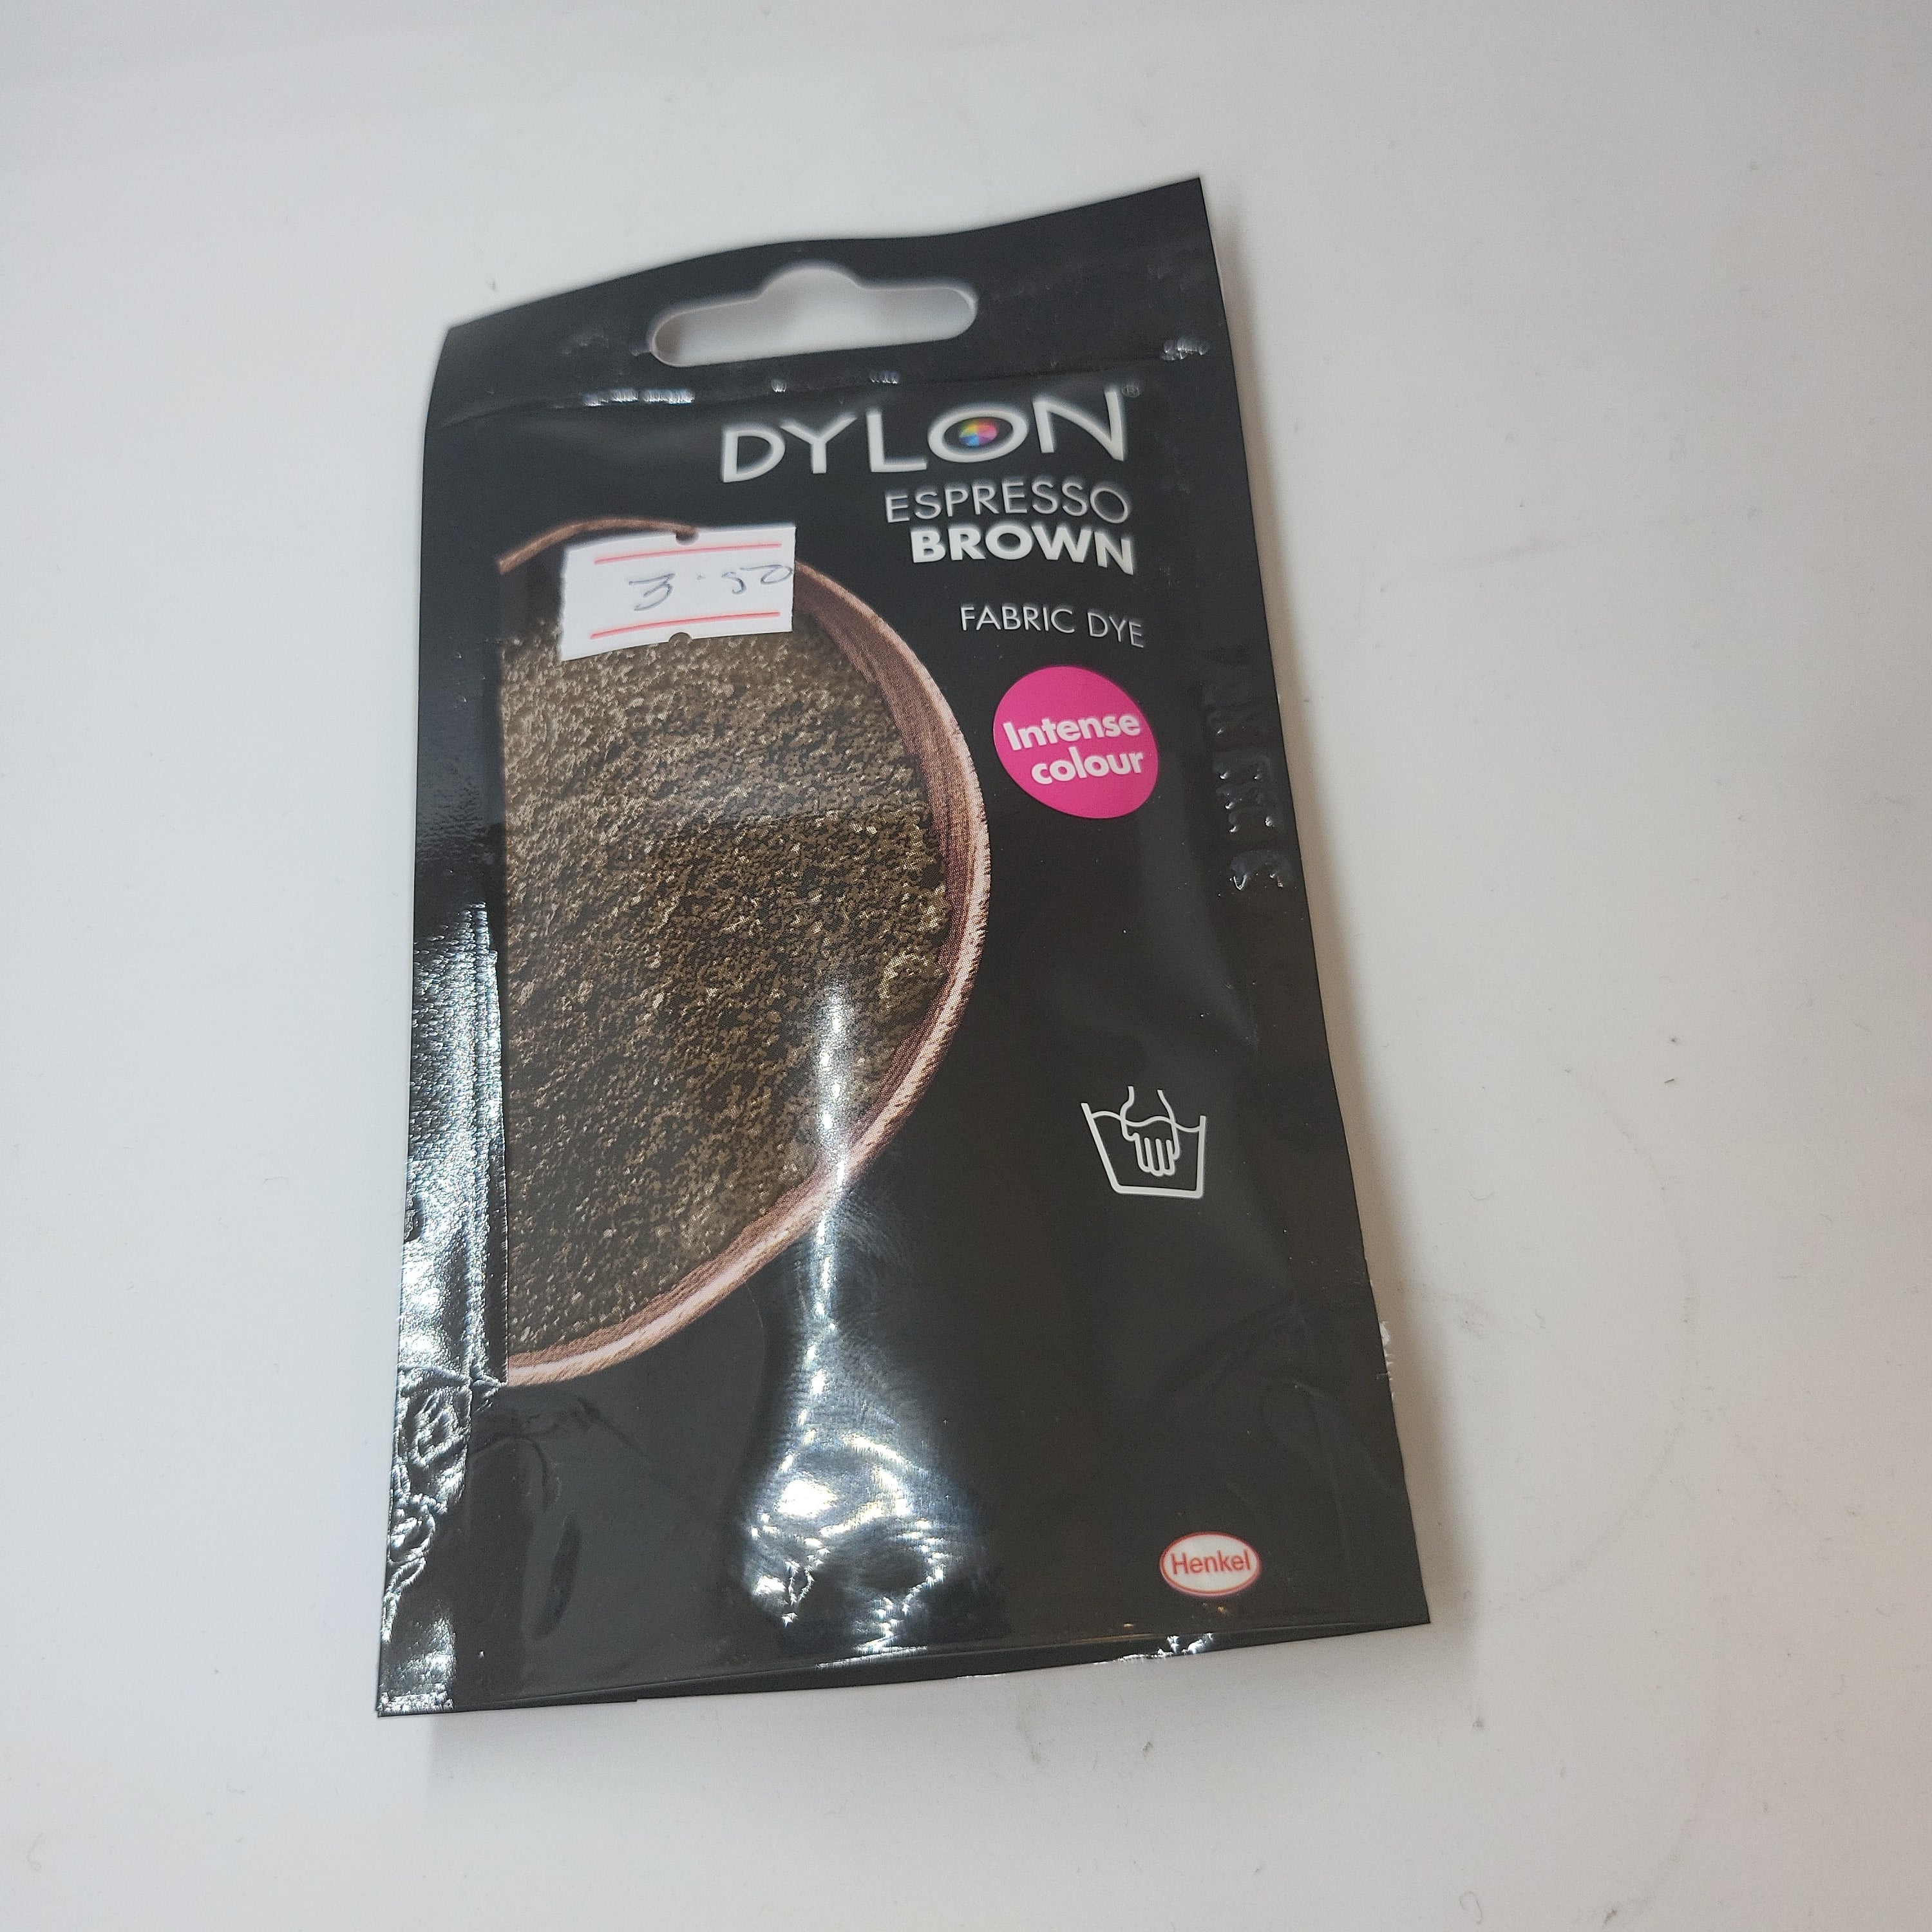 Dylon Fabric Dye for Hand Use - Espresso Brown at Barnitts Online